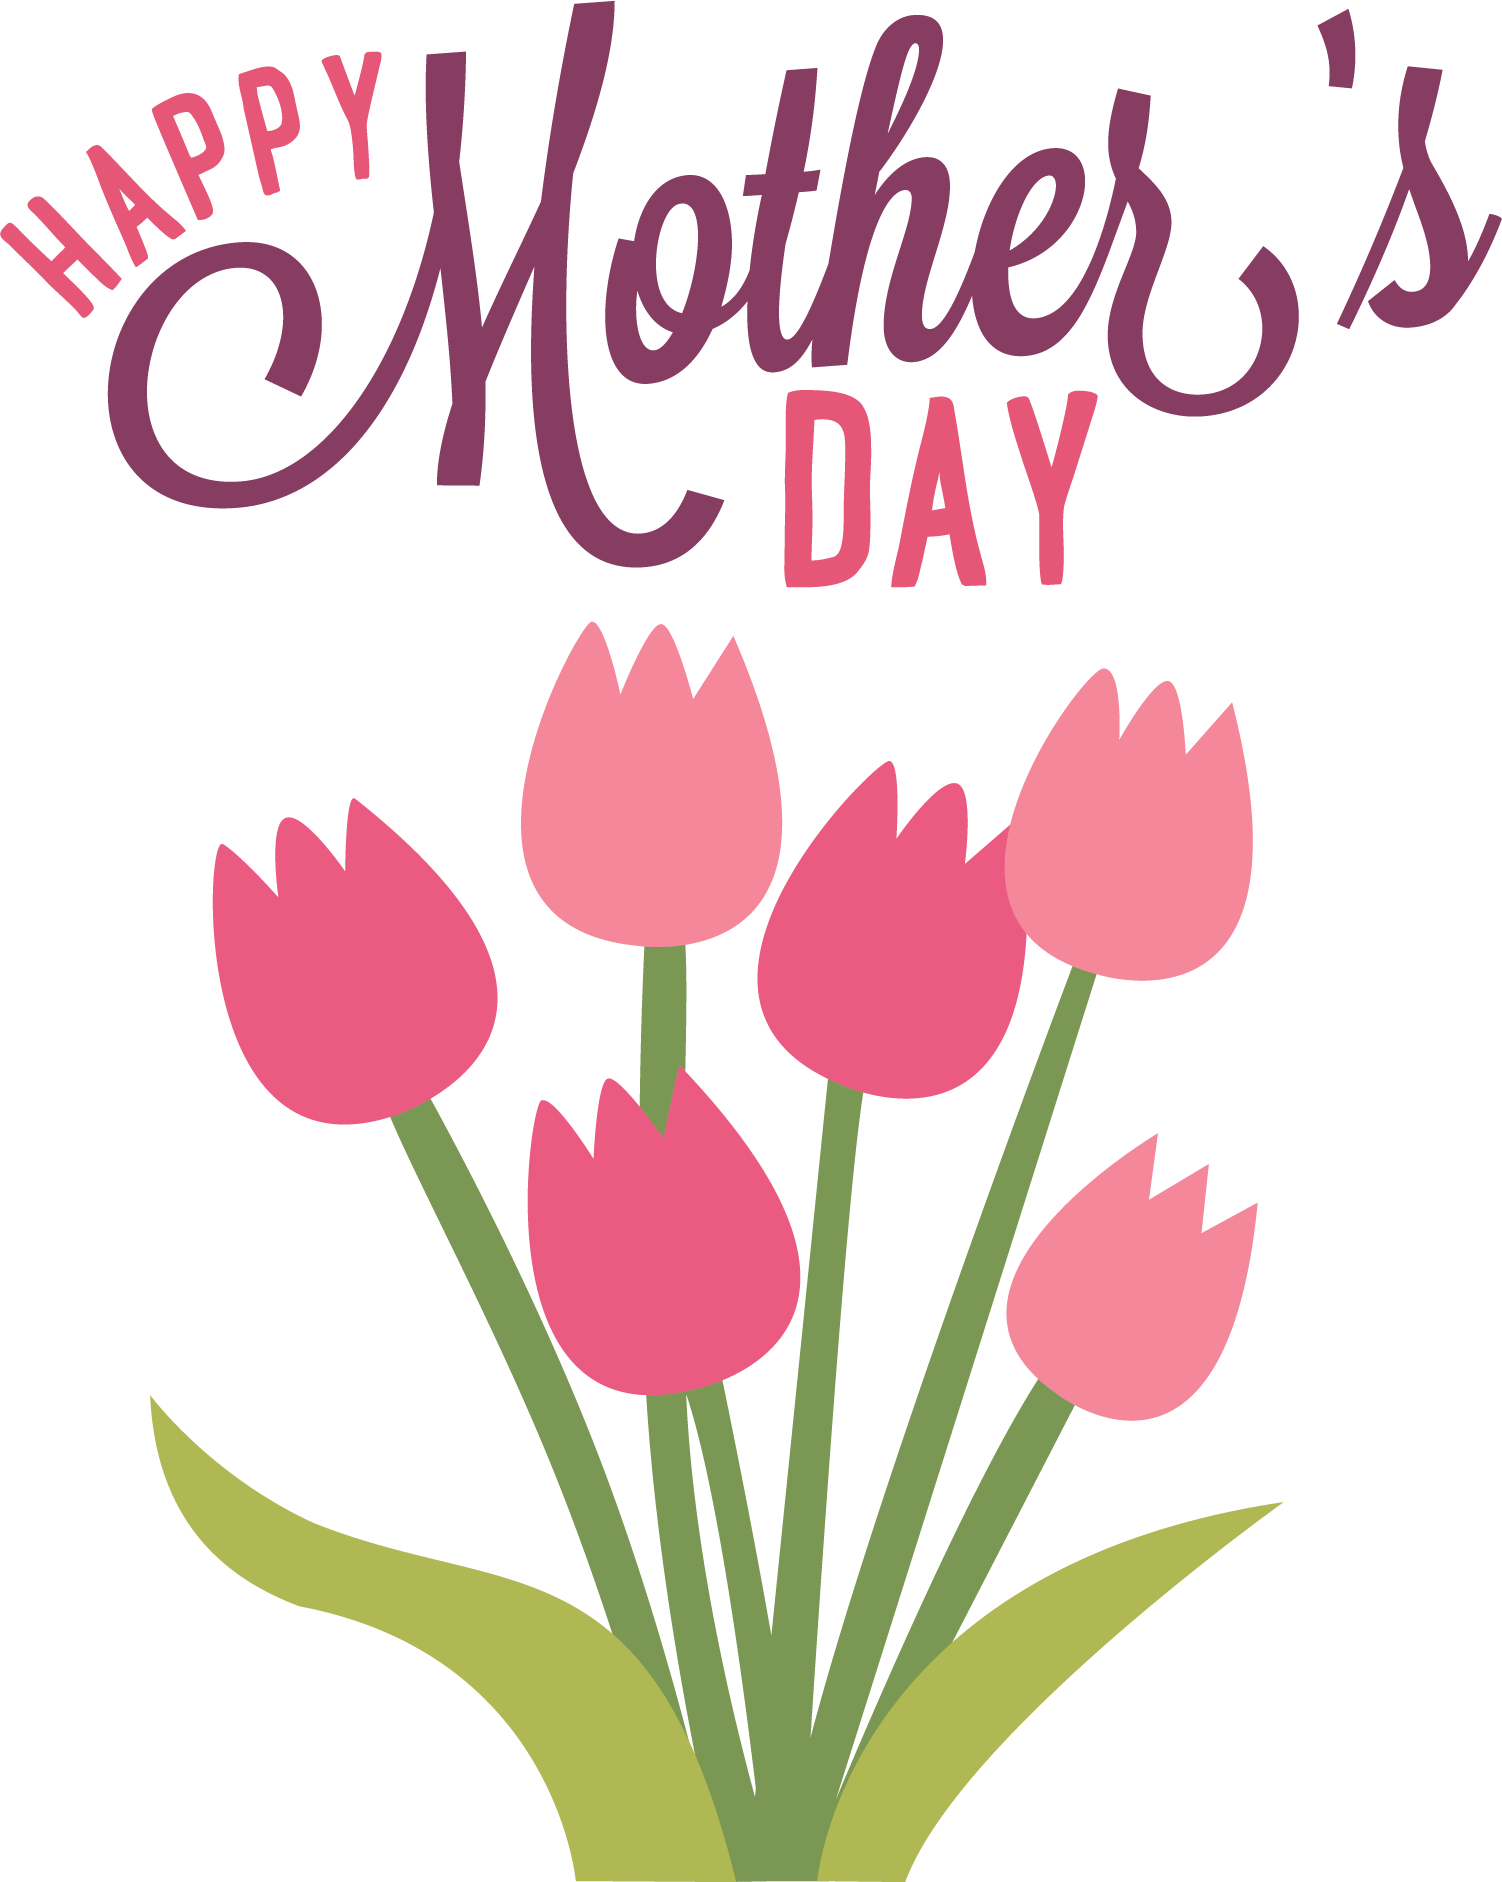 clip art for mother's day cards - photo #43